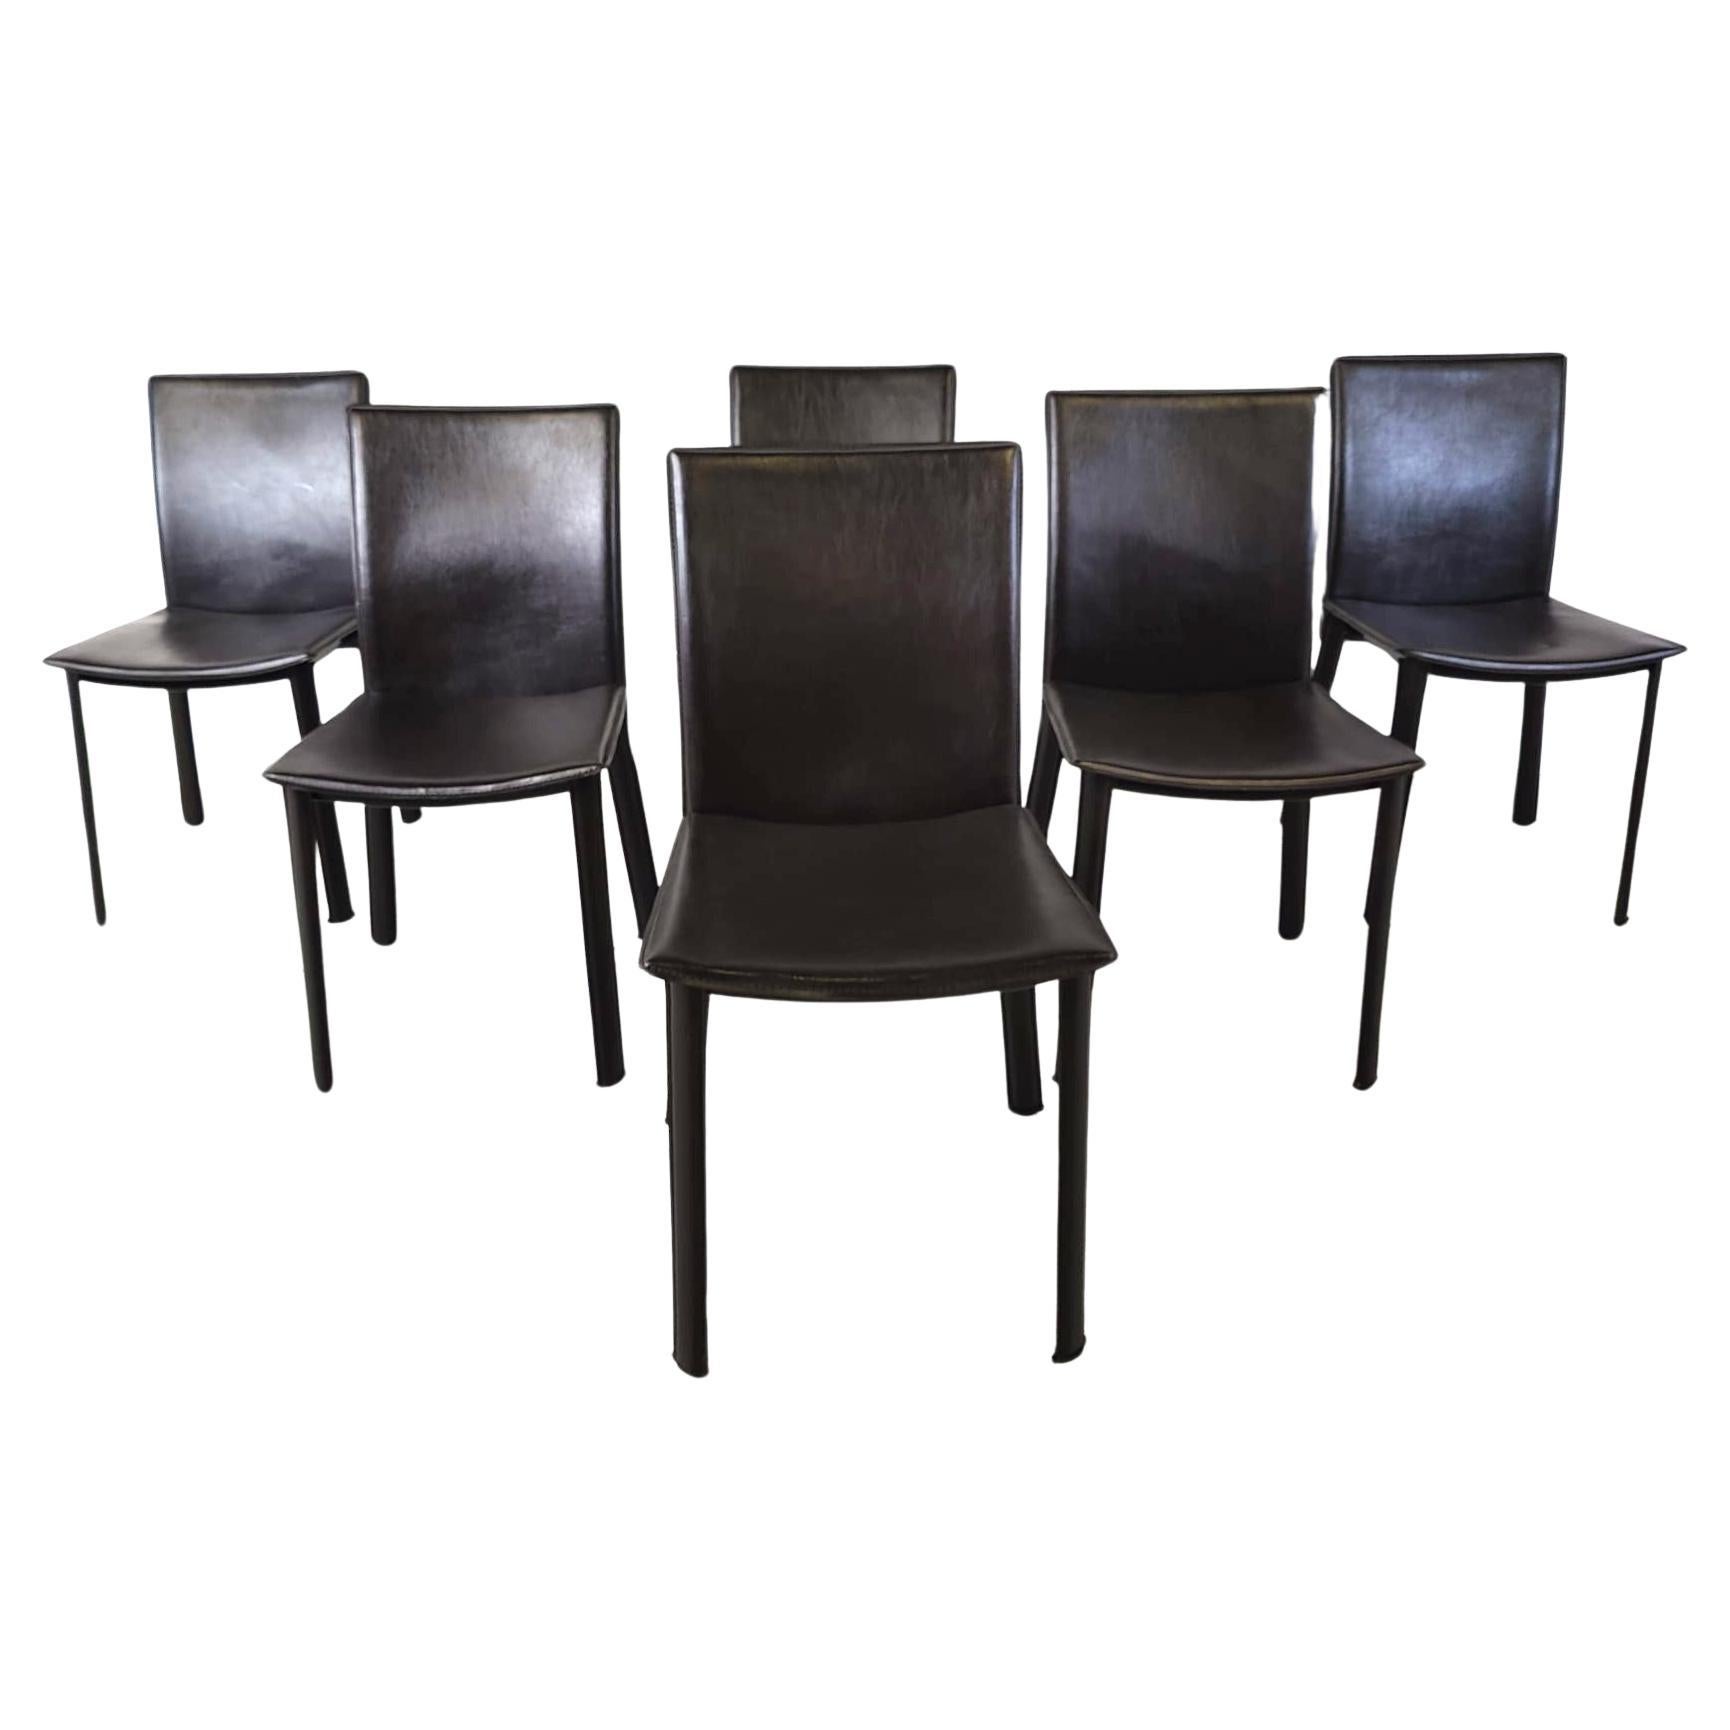 Black leather dining chairs, set of 6 - 1980s For Sale